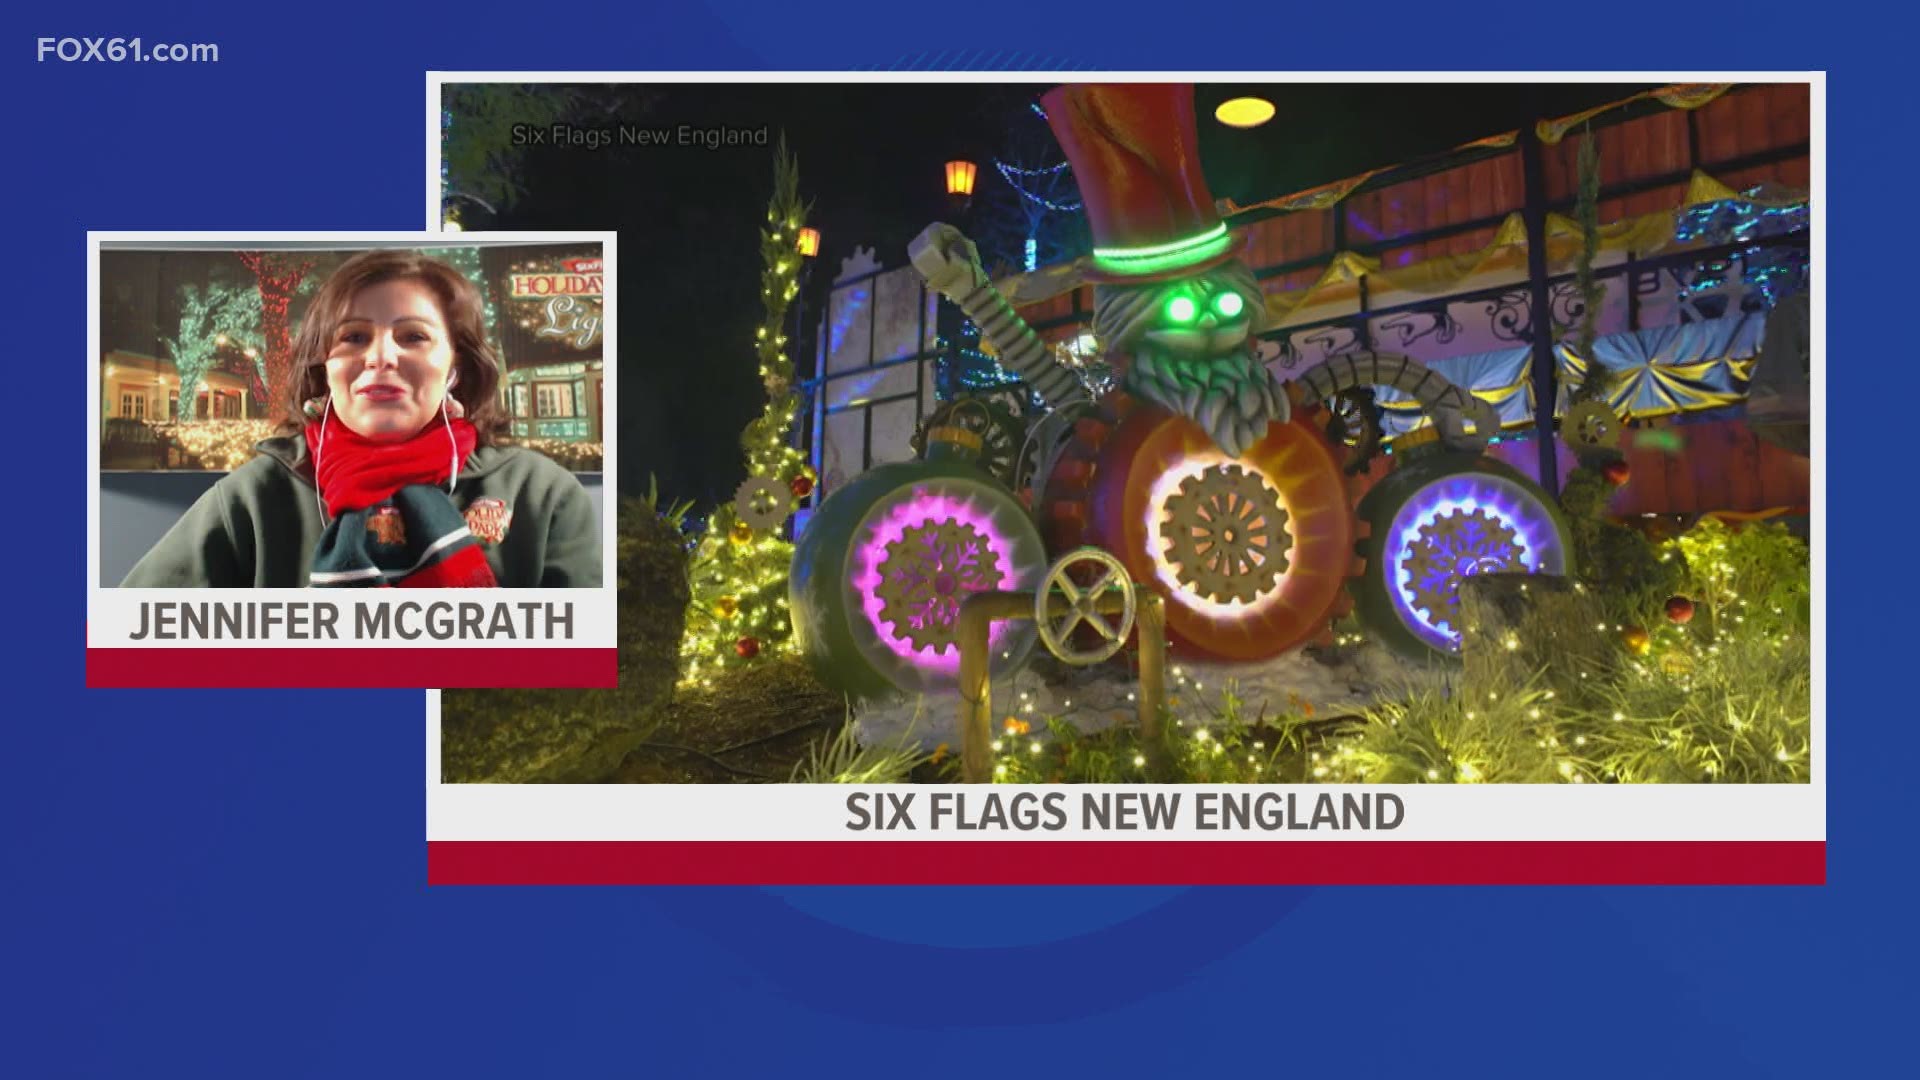 Six Flags New England is extending their holiday season! Their lights festival is now running through Sunday, January 3rd.